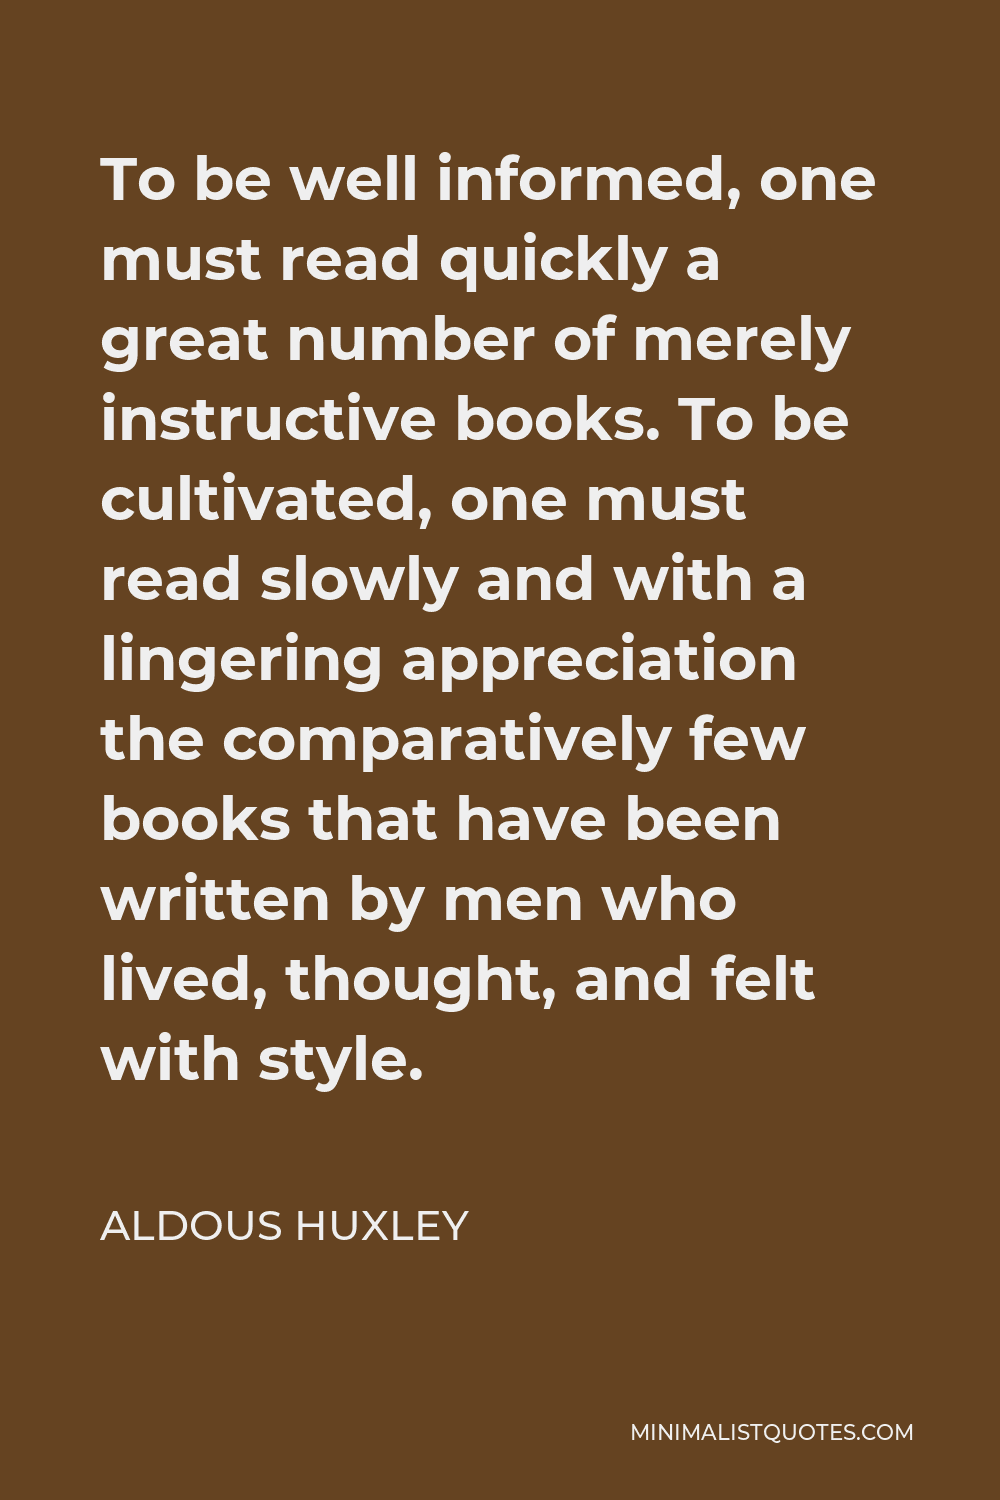 Aldous Huxley Quote - To be well informed, one must read quickly a great number of merely instructive books. To be cultivated, one must read slowly and with a lingering appreciation the comparatively few books that have been written by men who lived, thought, and felt with style.